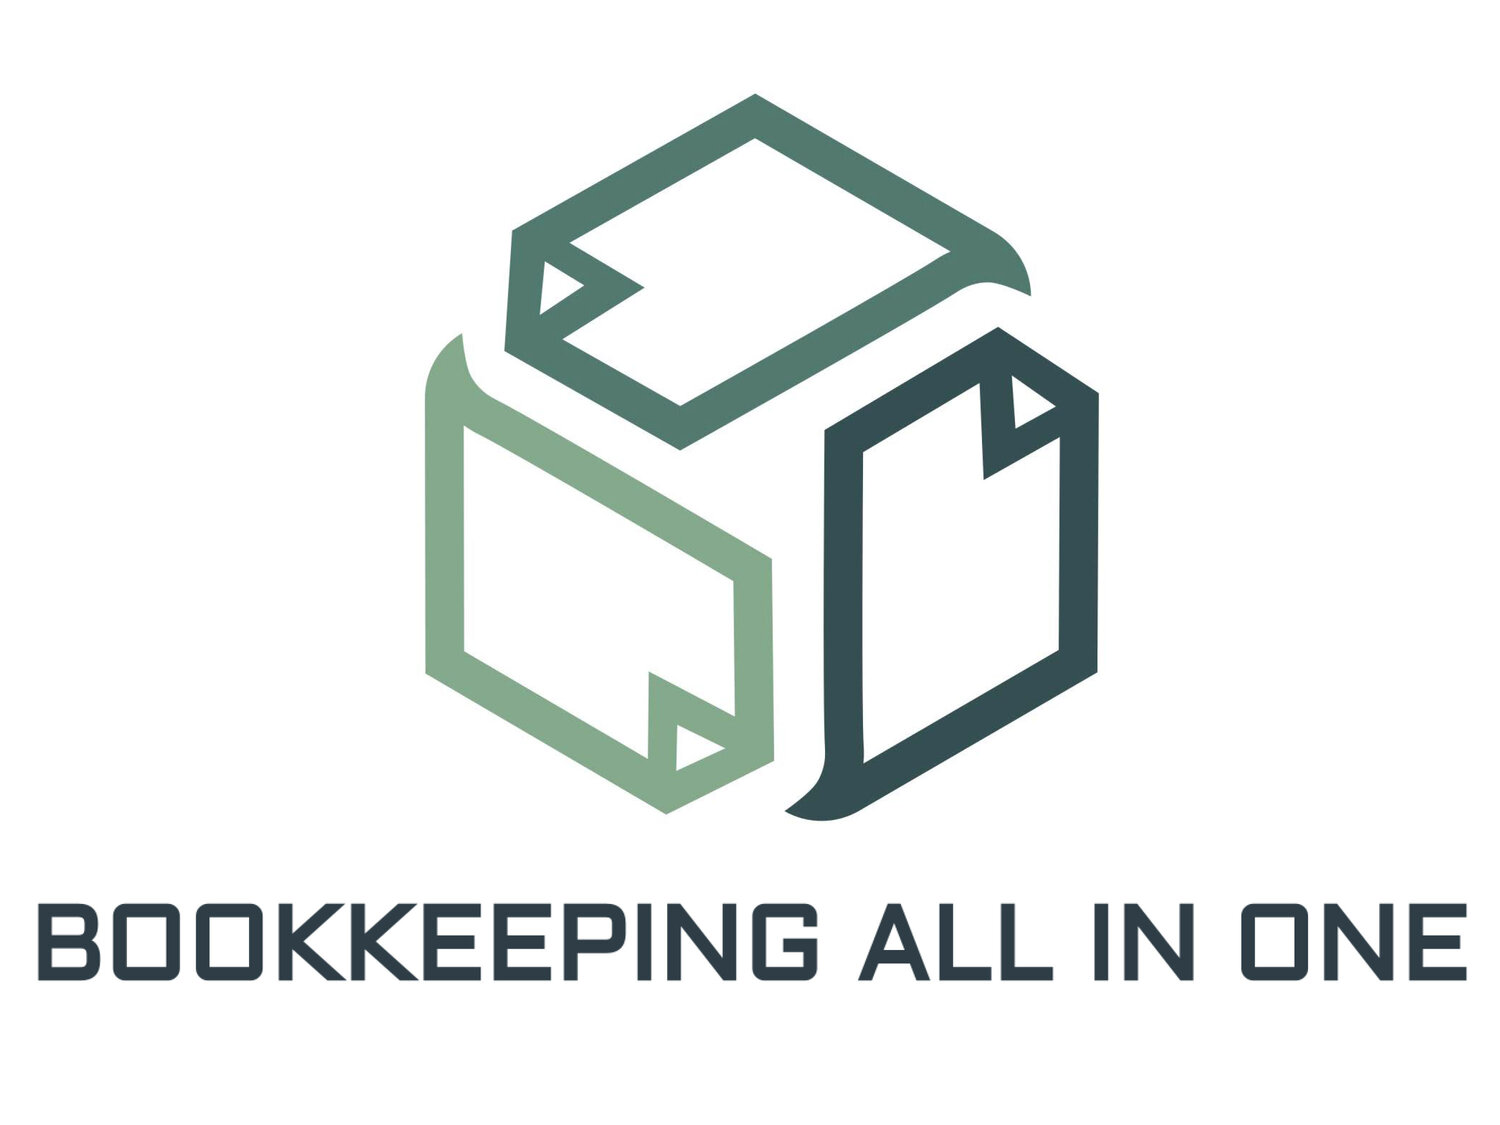 BOOKKEEPING ALL IN ONE